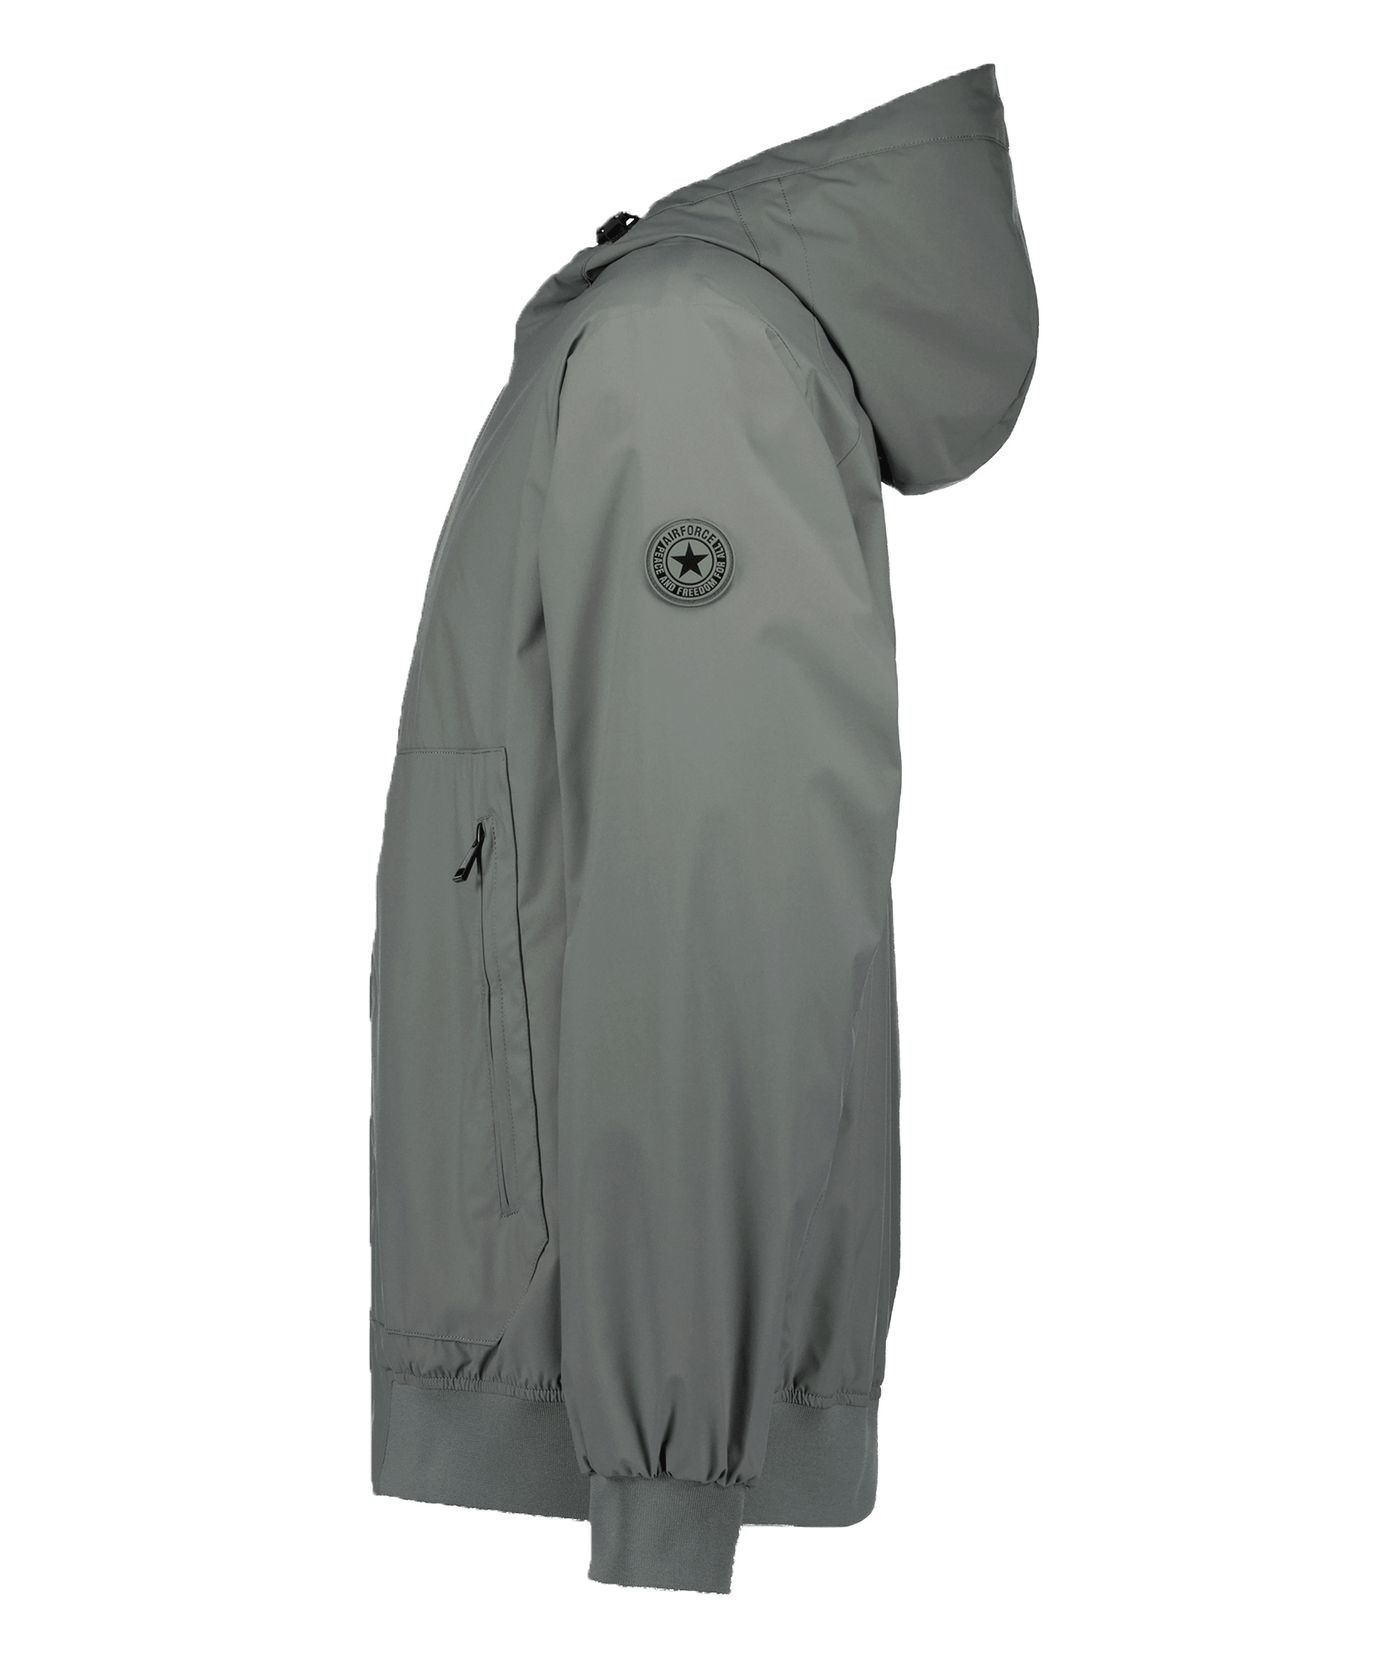 Airforce - Hrm0575 - Softshell Jacket - 930 Castor Gray